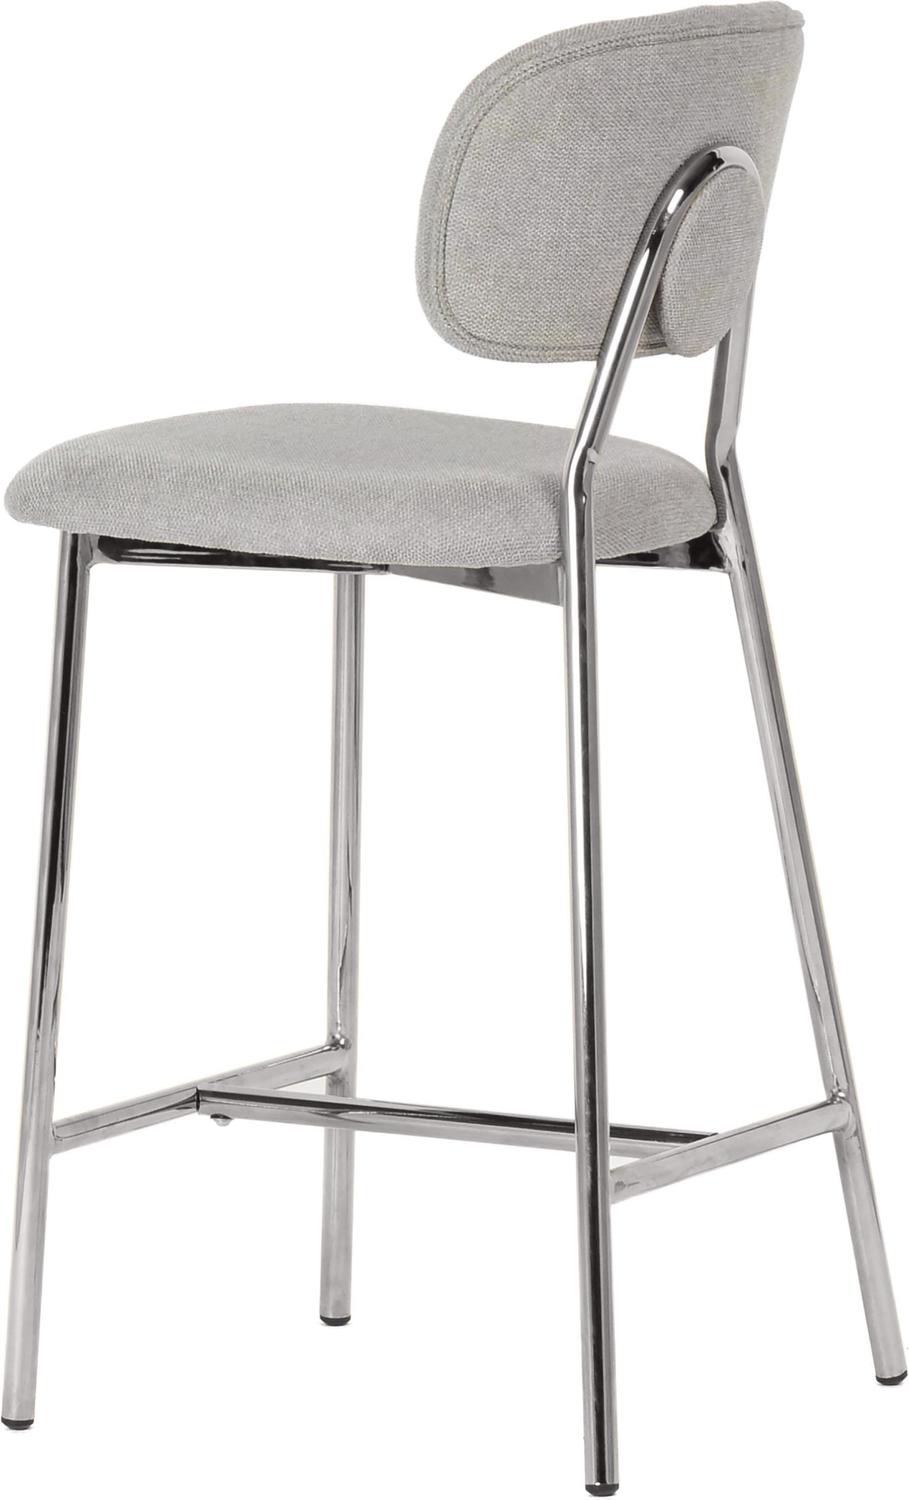 4 bar stools with backs Contemporary Design Furniture Stools Bar Chairs and Stools Grey